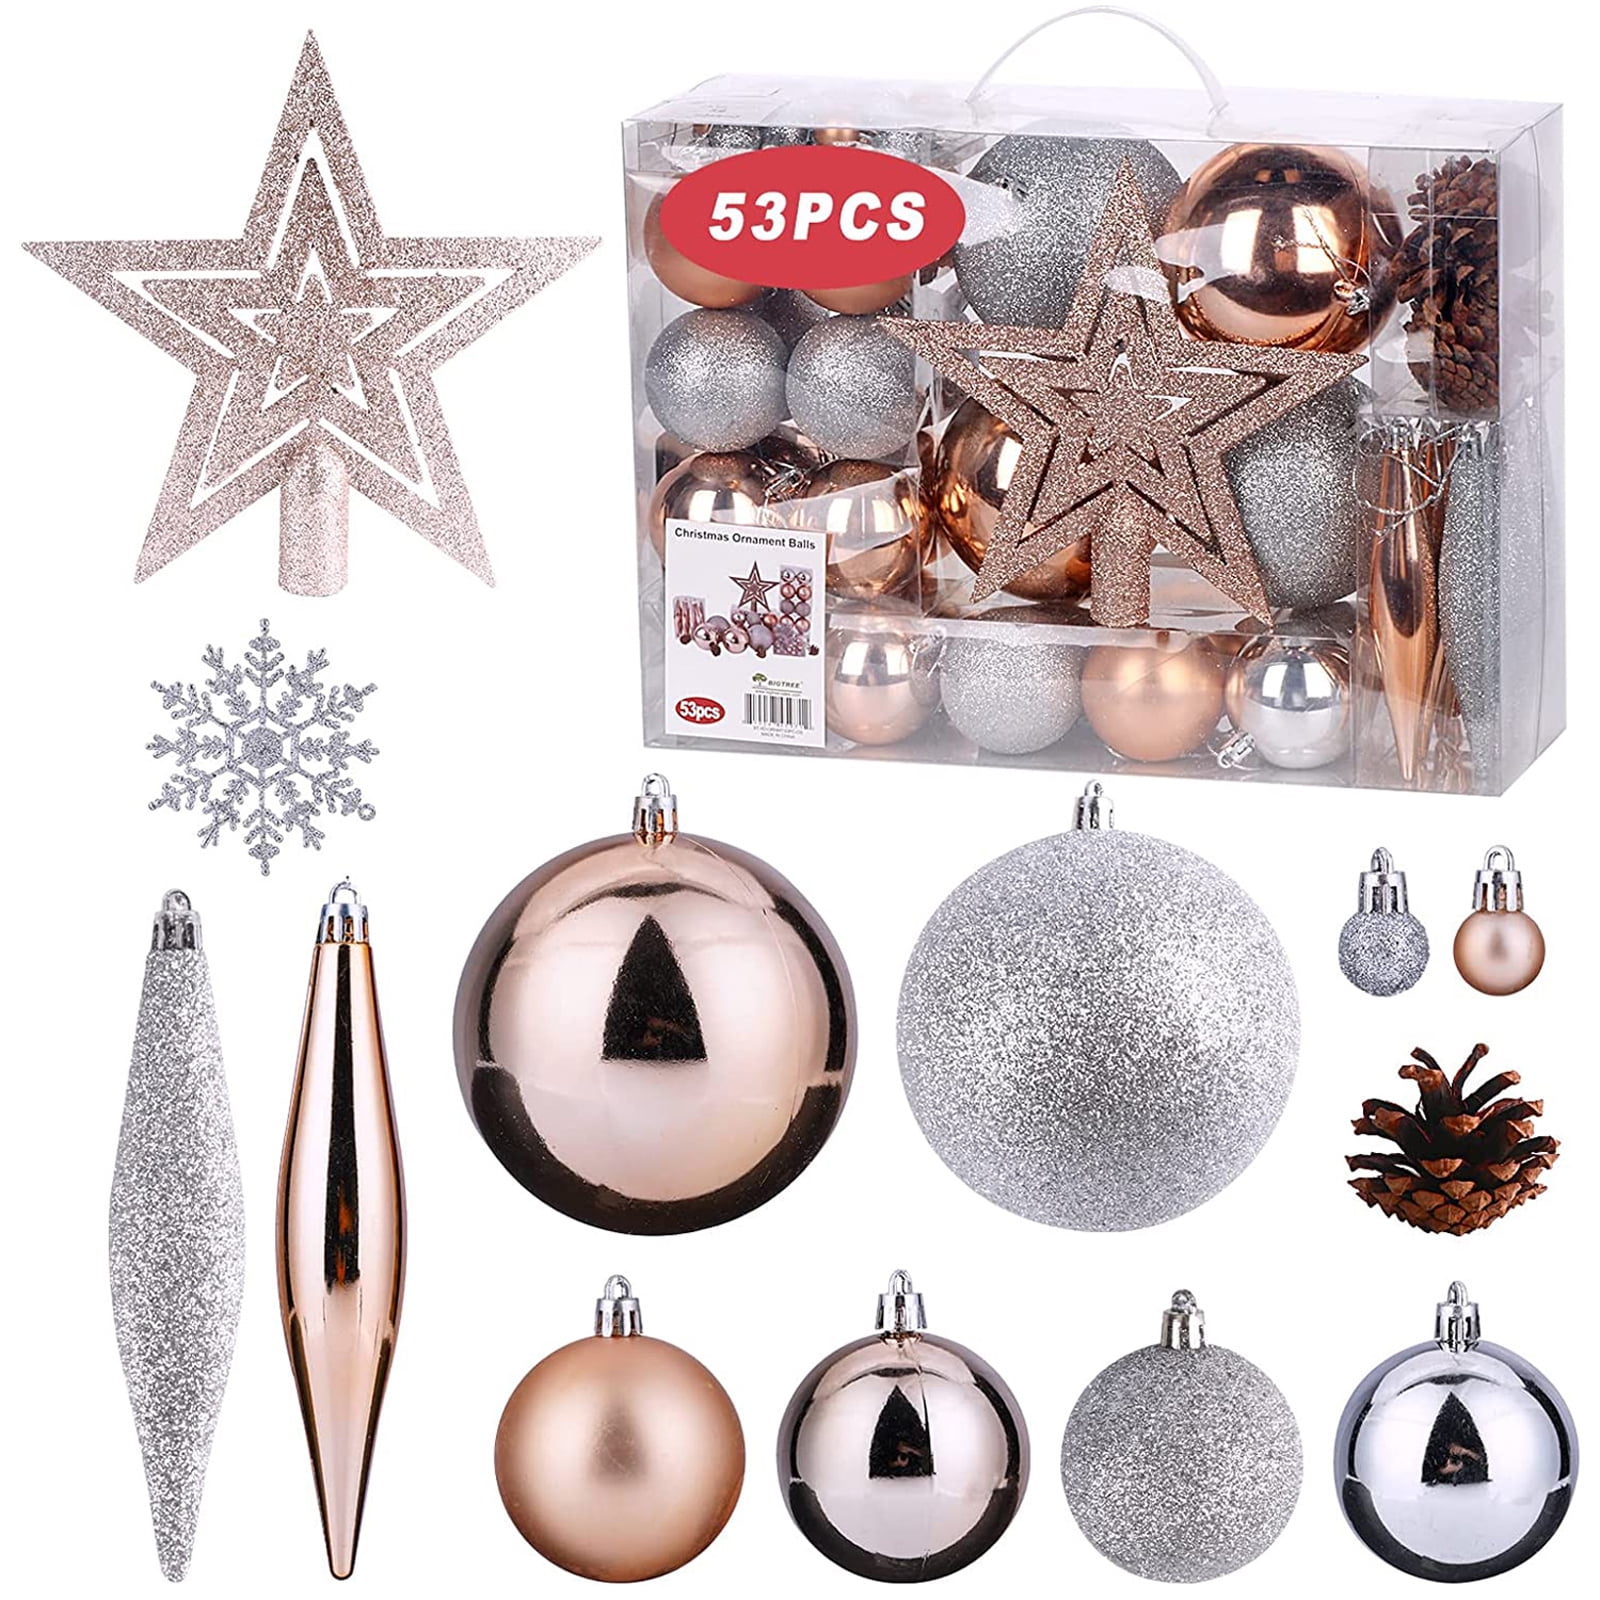 BIGTREE 53 Piece Christmas Ball Glitter Ornaments Shatterproof Christmas Decorations Tree Xmas Holiday Wedding Party Decoration pic